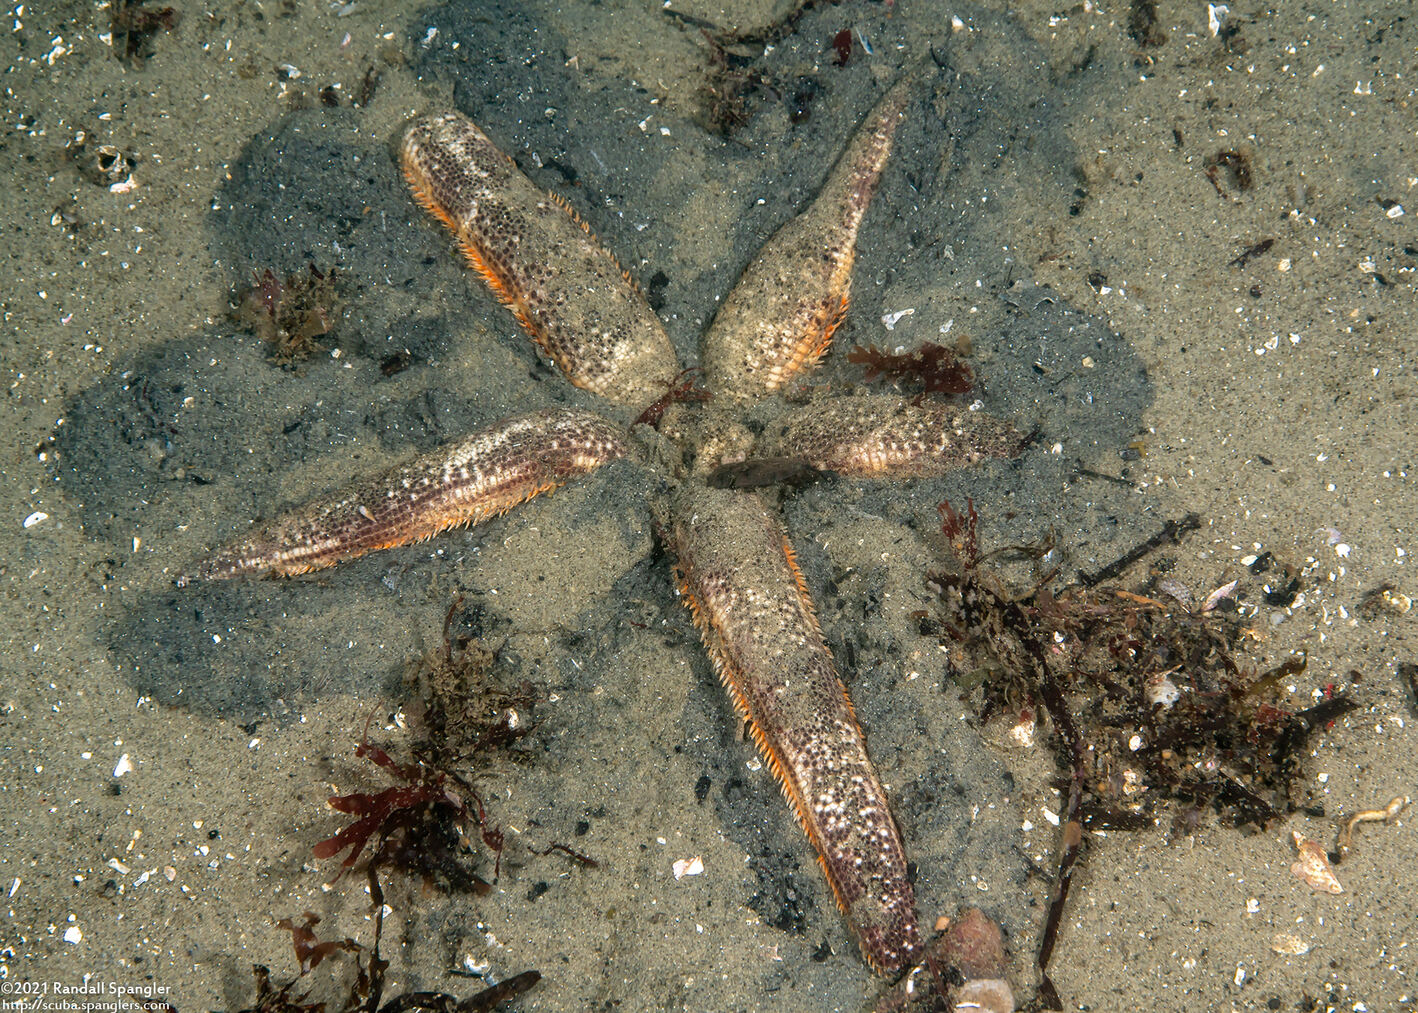 Luidia foliolata (Spiny Mudstar); Emerging from under the sand at night